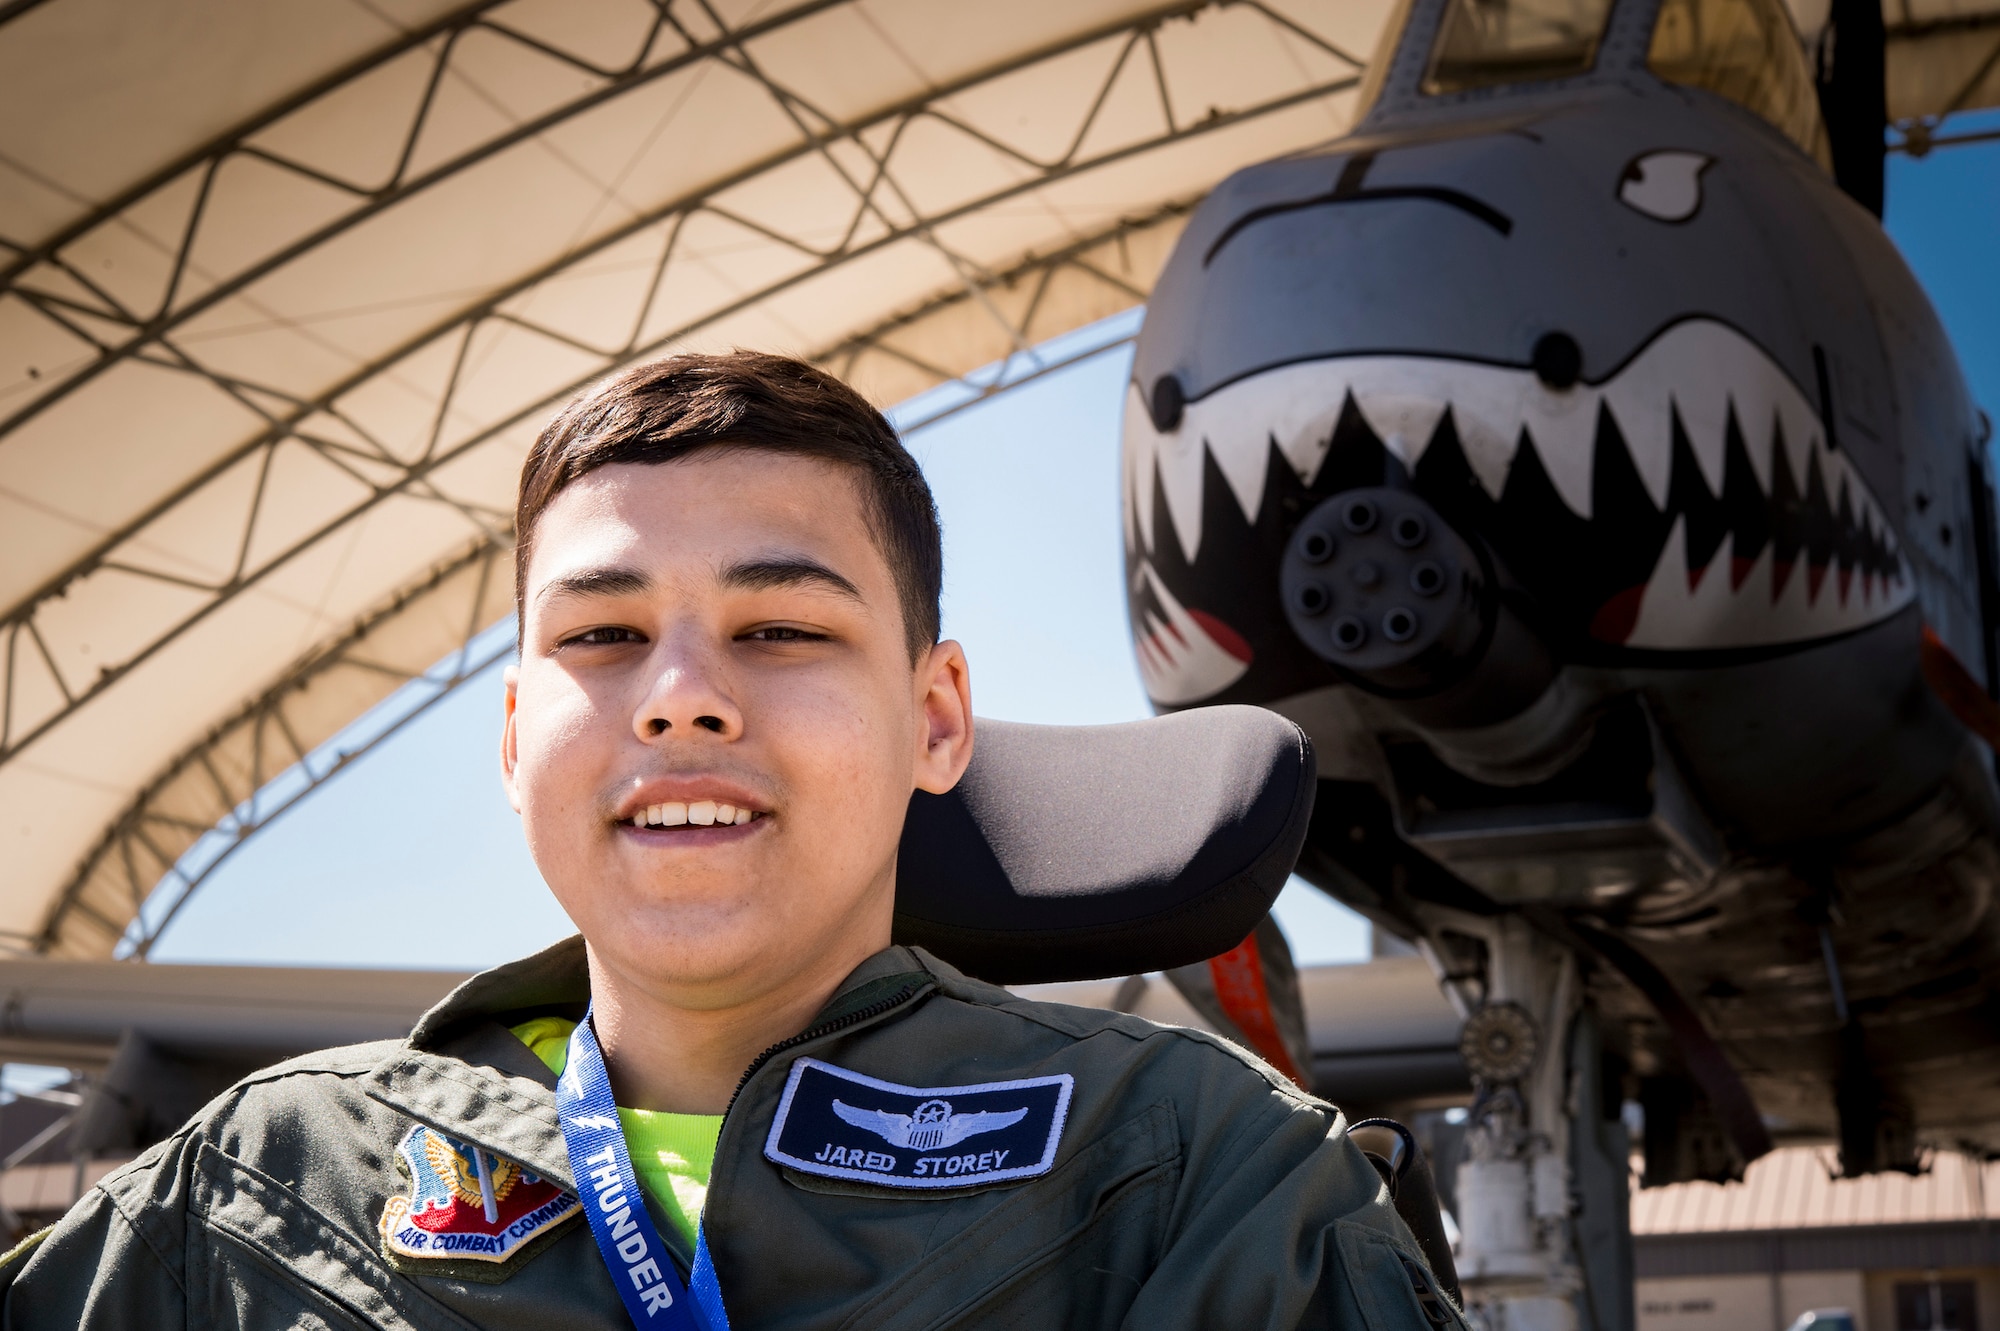 Jared Storey poses for a photo in front of an A-10C Thunderbolt II on the flightline, March 14, 2018, at Moody Air Force Base, Ga. Pilots from the 23d Fighter Group made Storey, who is terminally ill with Osteosarcoma, a rare form of bone cancer, an honorary A-10 pilot for a day. (U.S. Air Force photo by Andrea Jenkins)